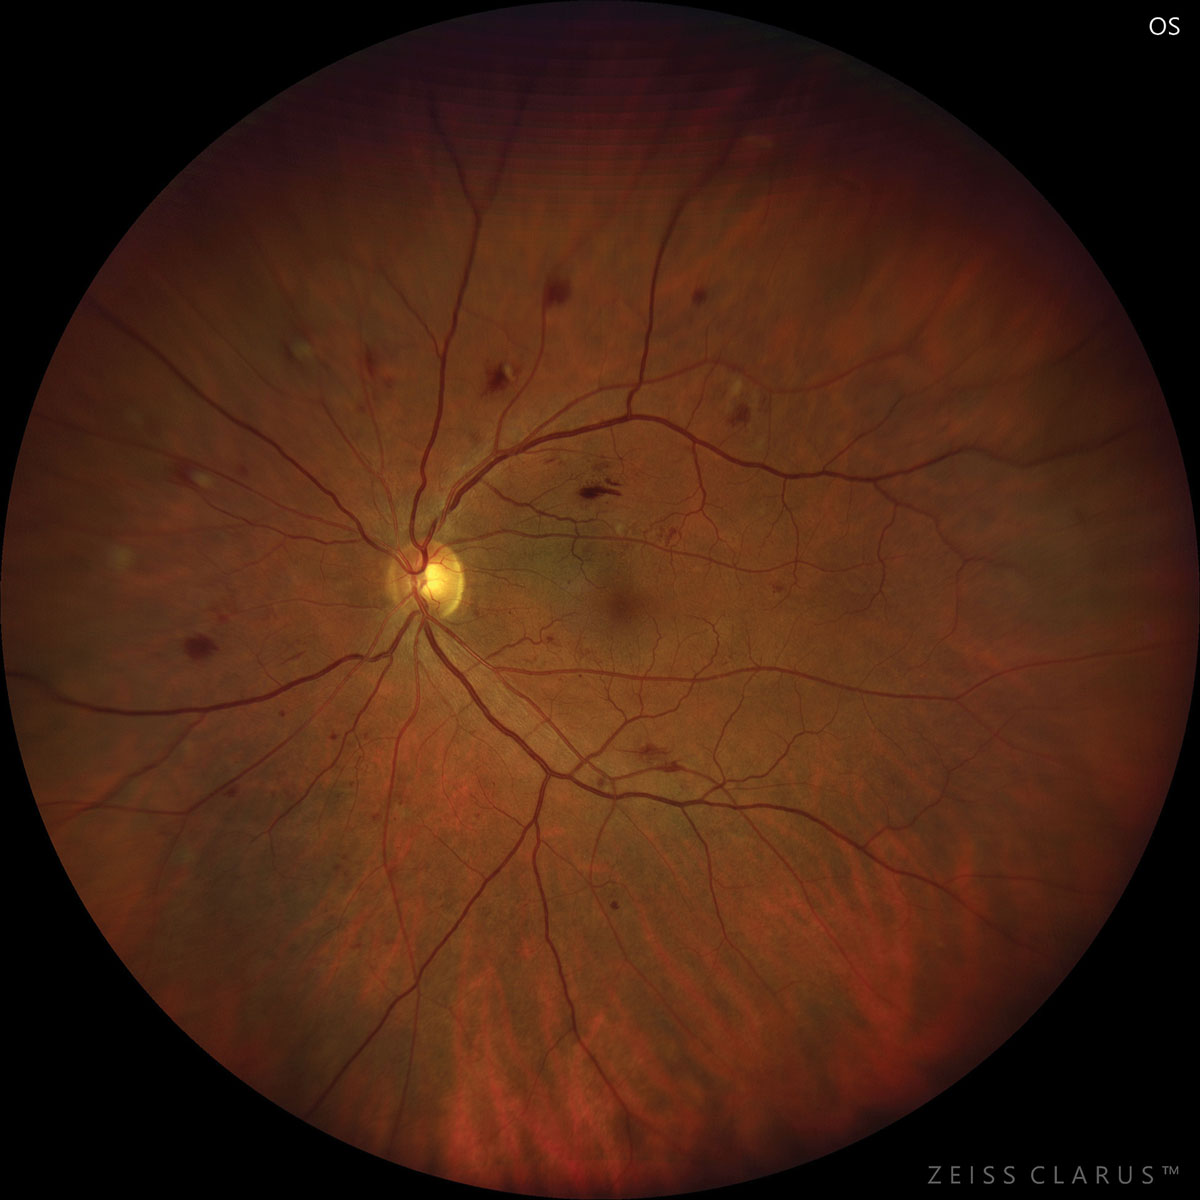 Non-glycemic metabolic risk factors may be especially relevant to the risk of retinopathy in prediabetes and extend the previously suggested protective effect of female sex on retinopathy in diabetes to prediabetes.